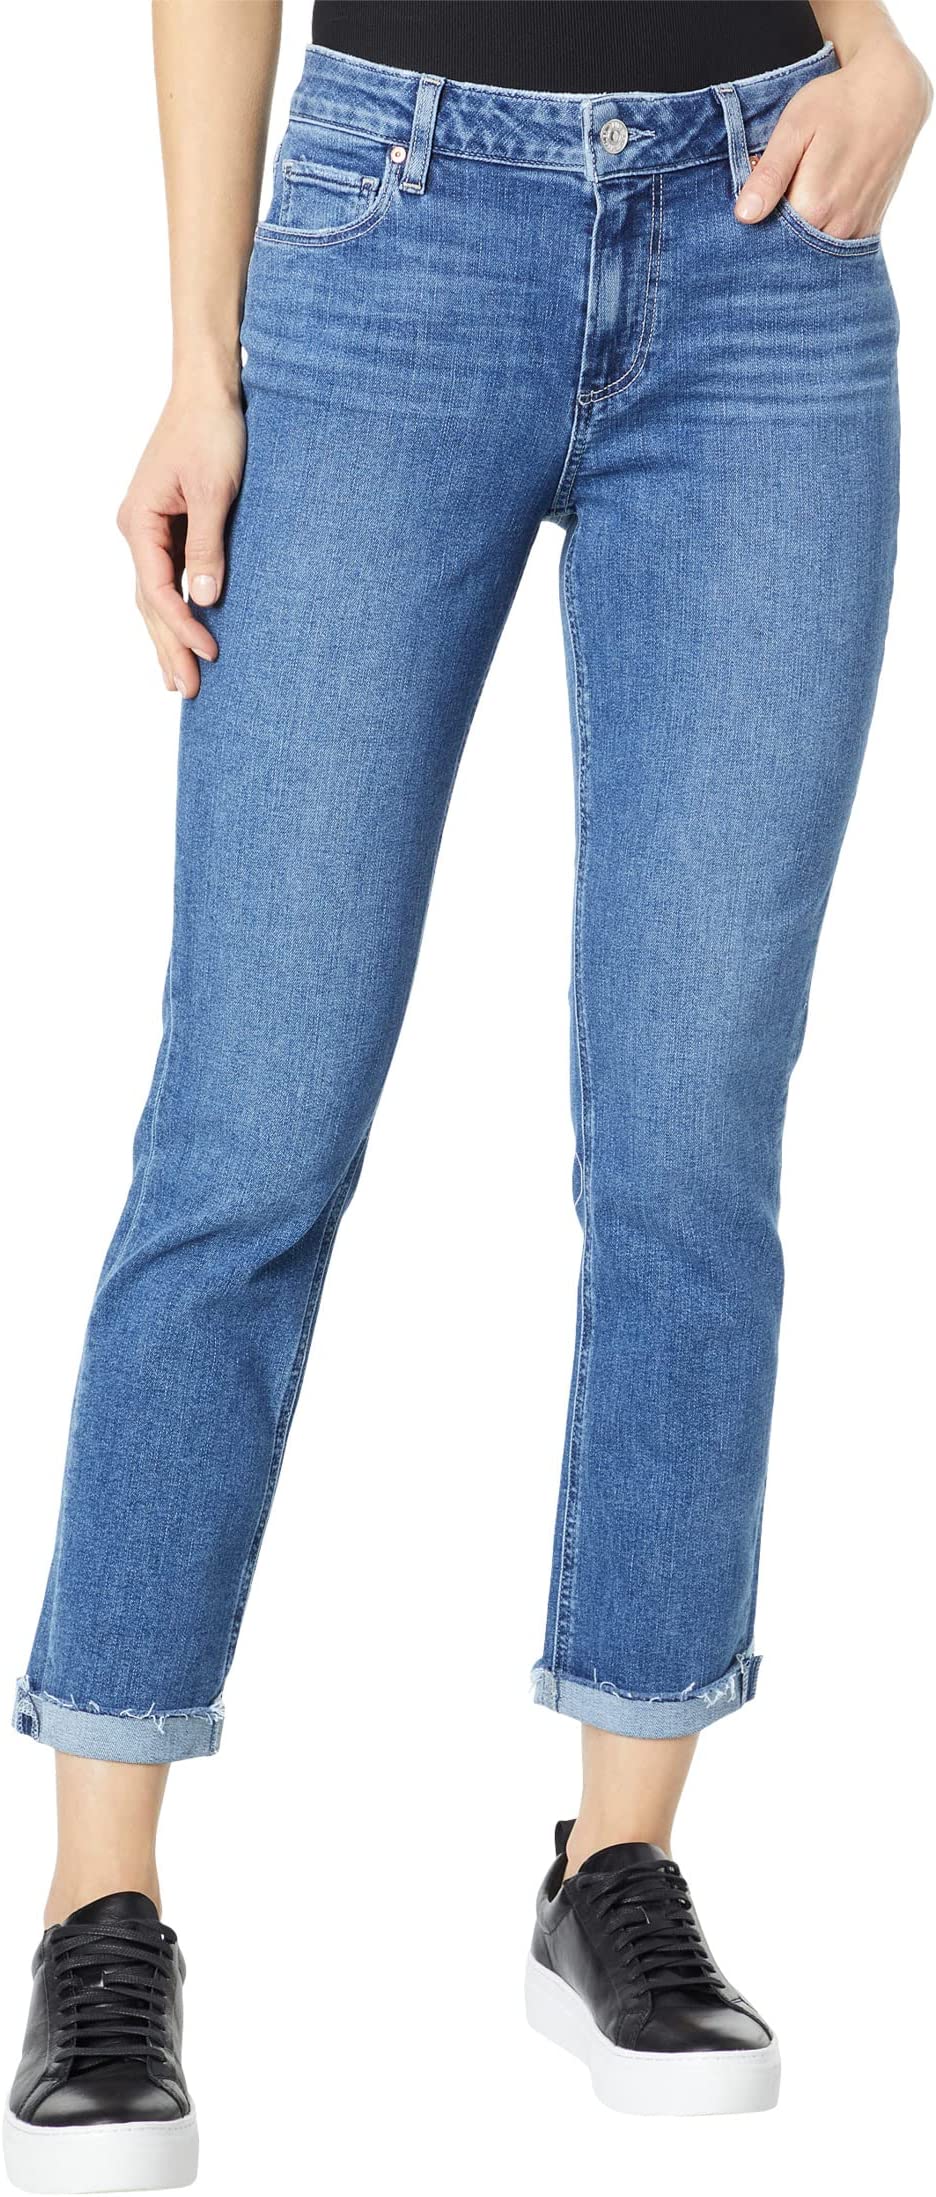 Paige Brigitte Raw Hem Cuff Jeans in Reflection - Clothing from Bod & Ted UK